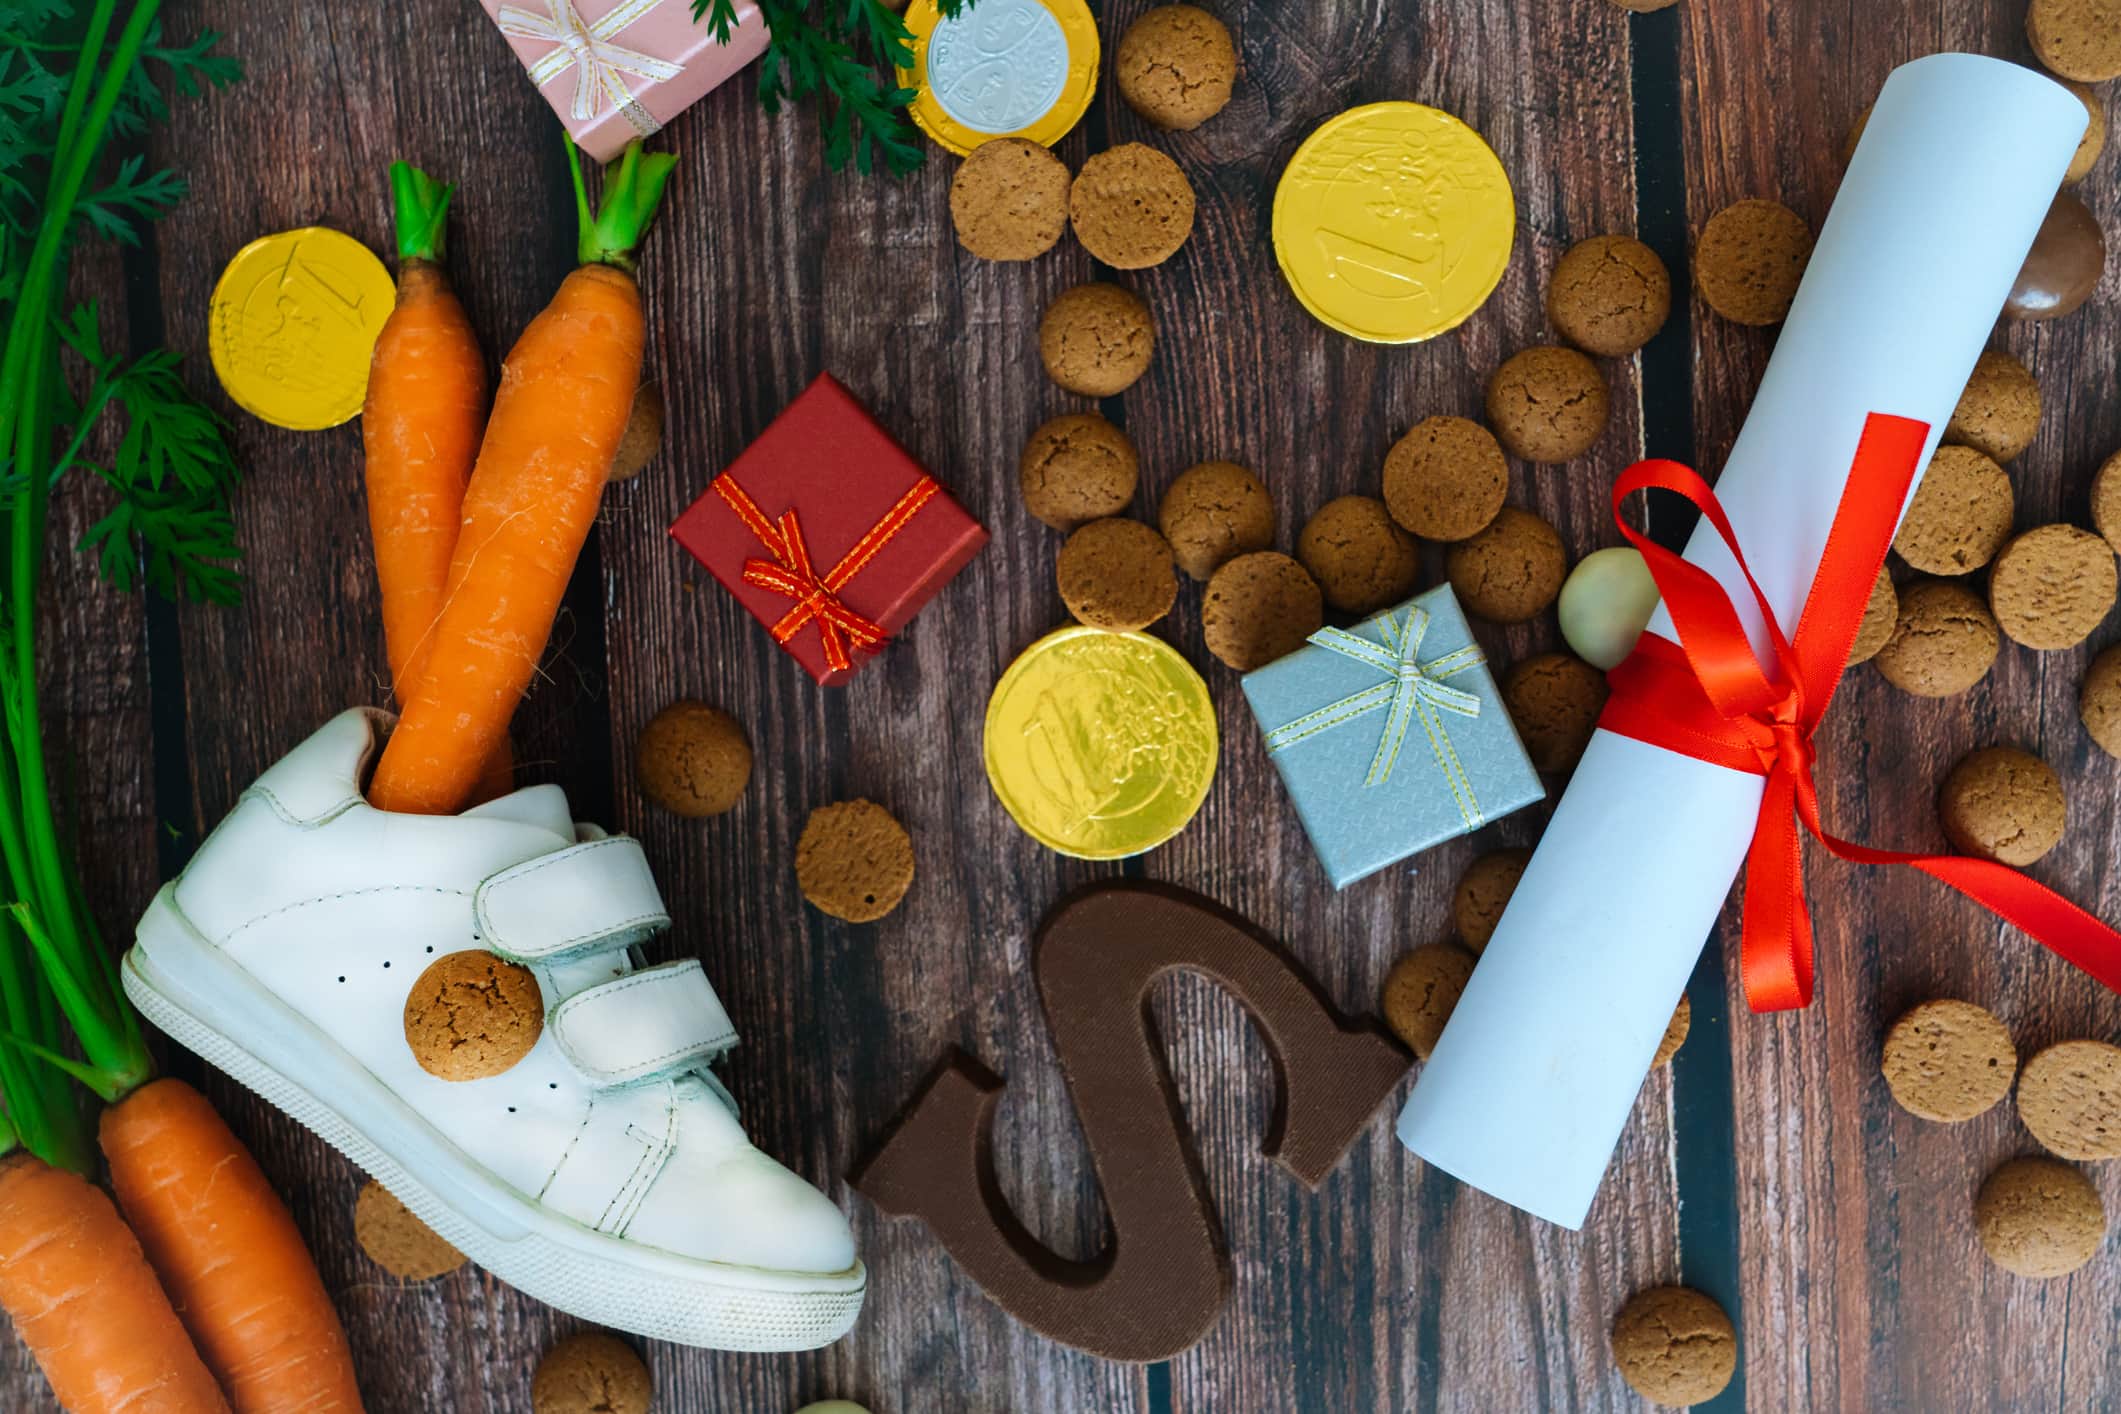 Dutch holiday Sinterklaas background with children shoe, carrots for Santa's horse, gifts, traditional sweets pepernoten and chocolate letter. Flat lay with copy space.